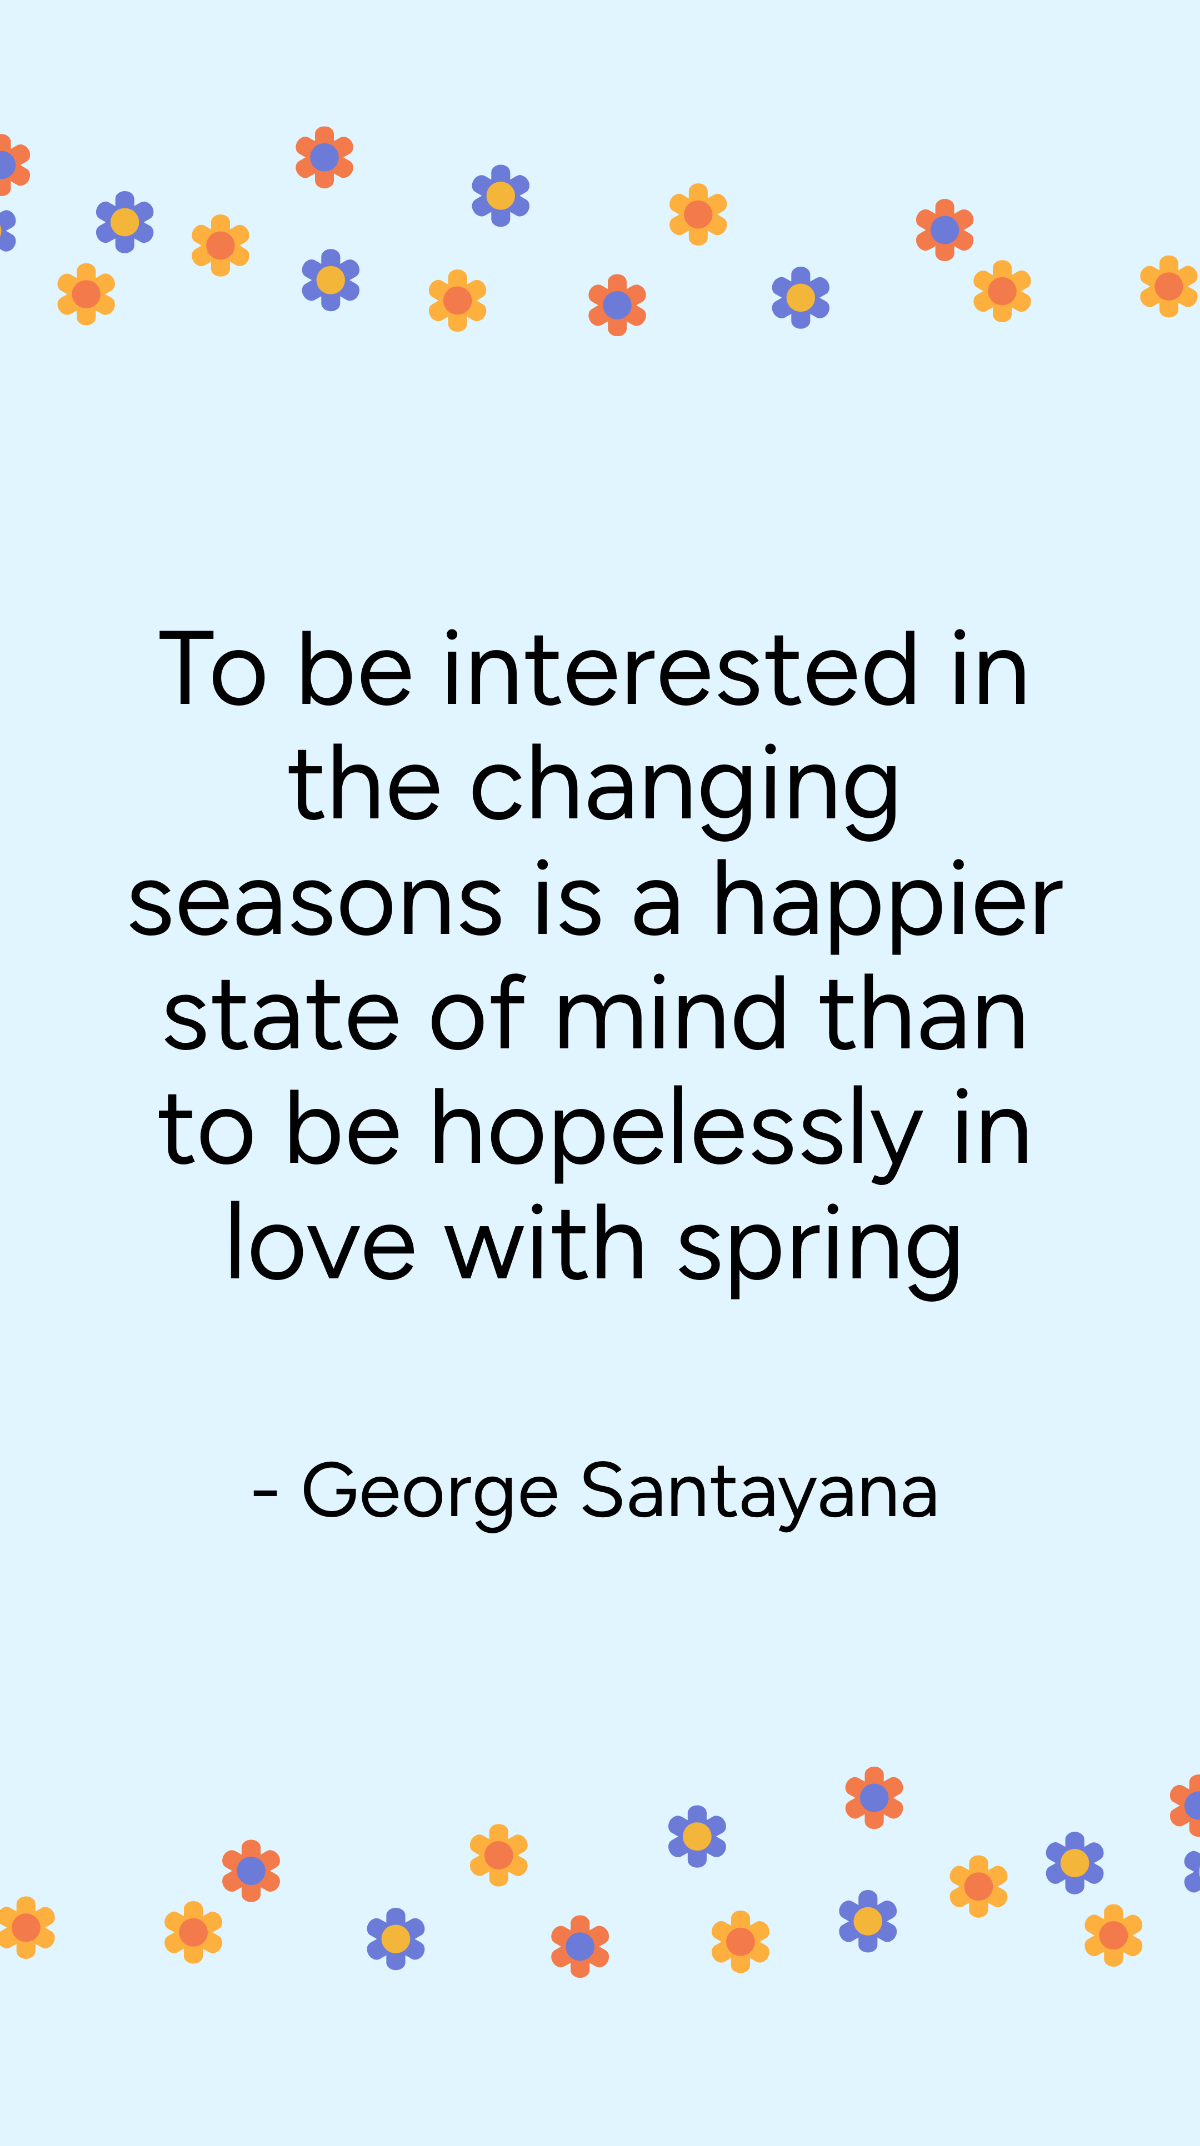 Free George Santayana - To be interested in the changing seasons is a happier state of mind than to be hopelessly in love with spring Template